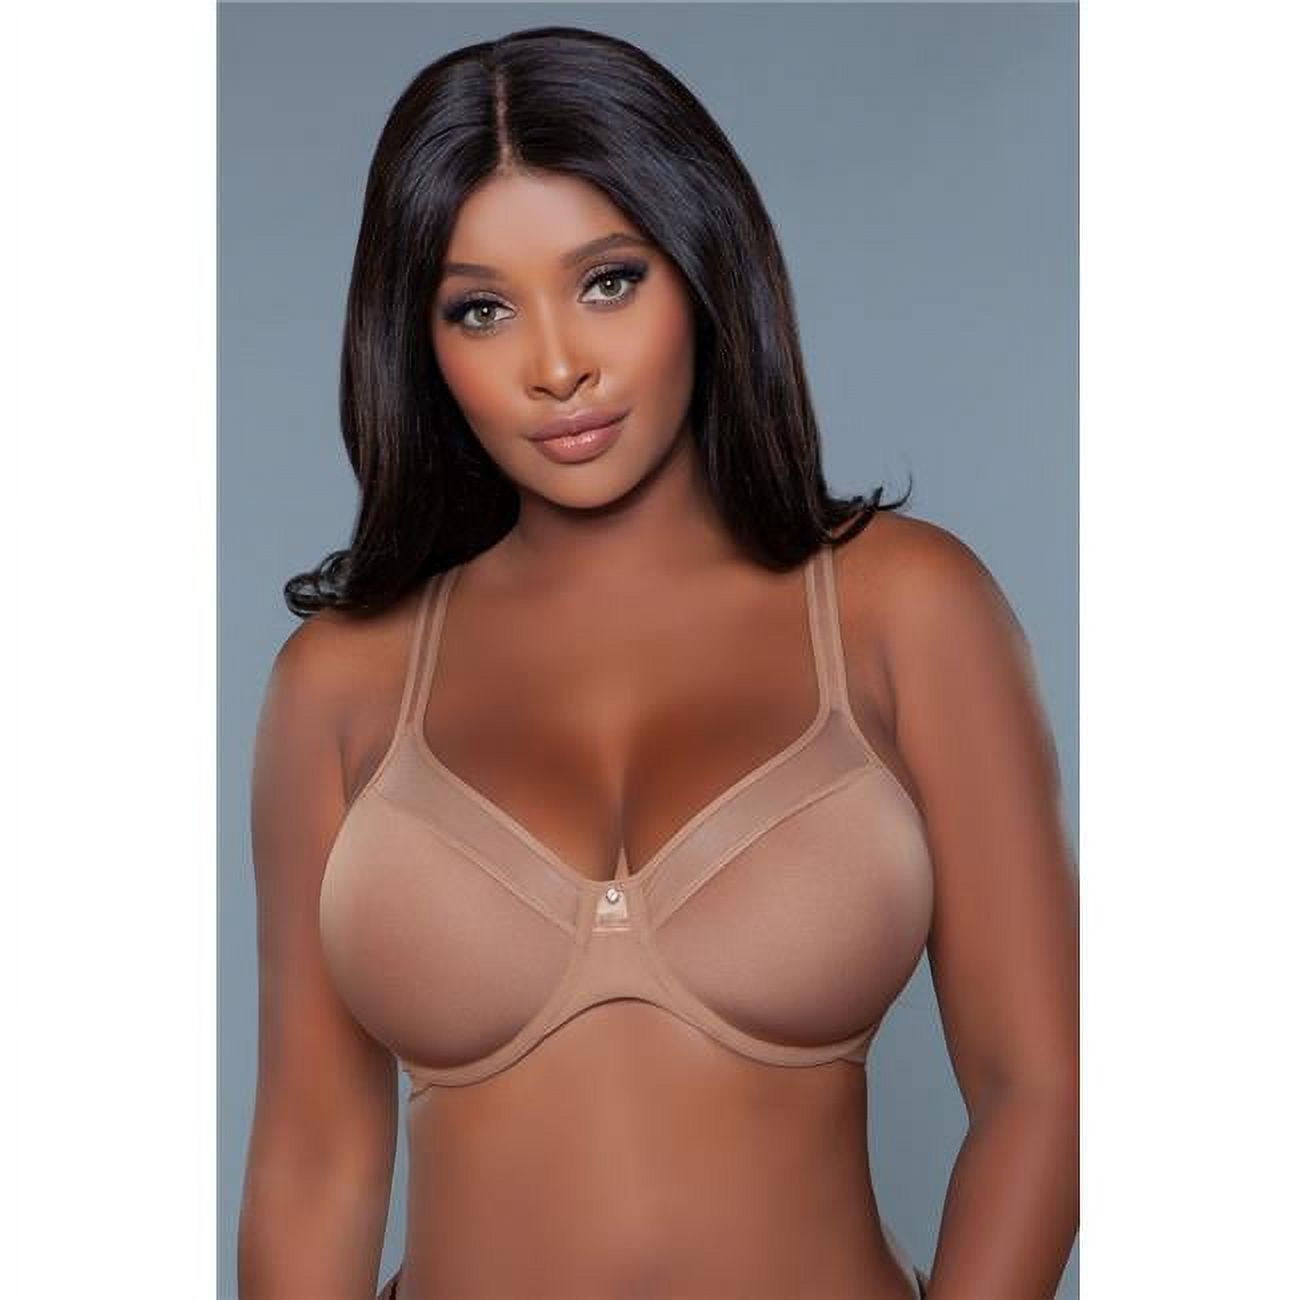 34f, 34g or cup depth issue? ? 34F - Scantilly » Brazen (4601)